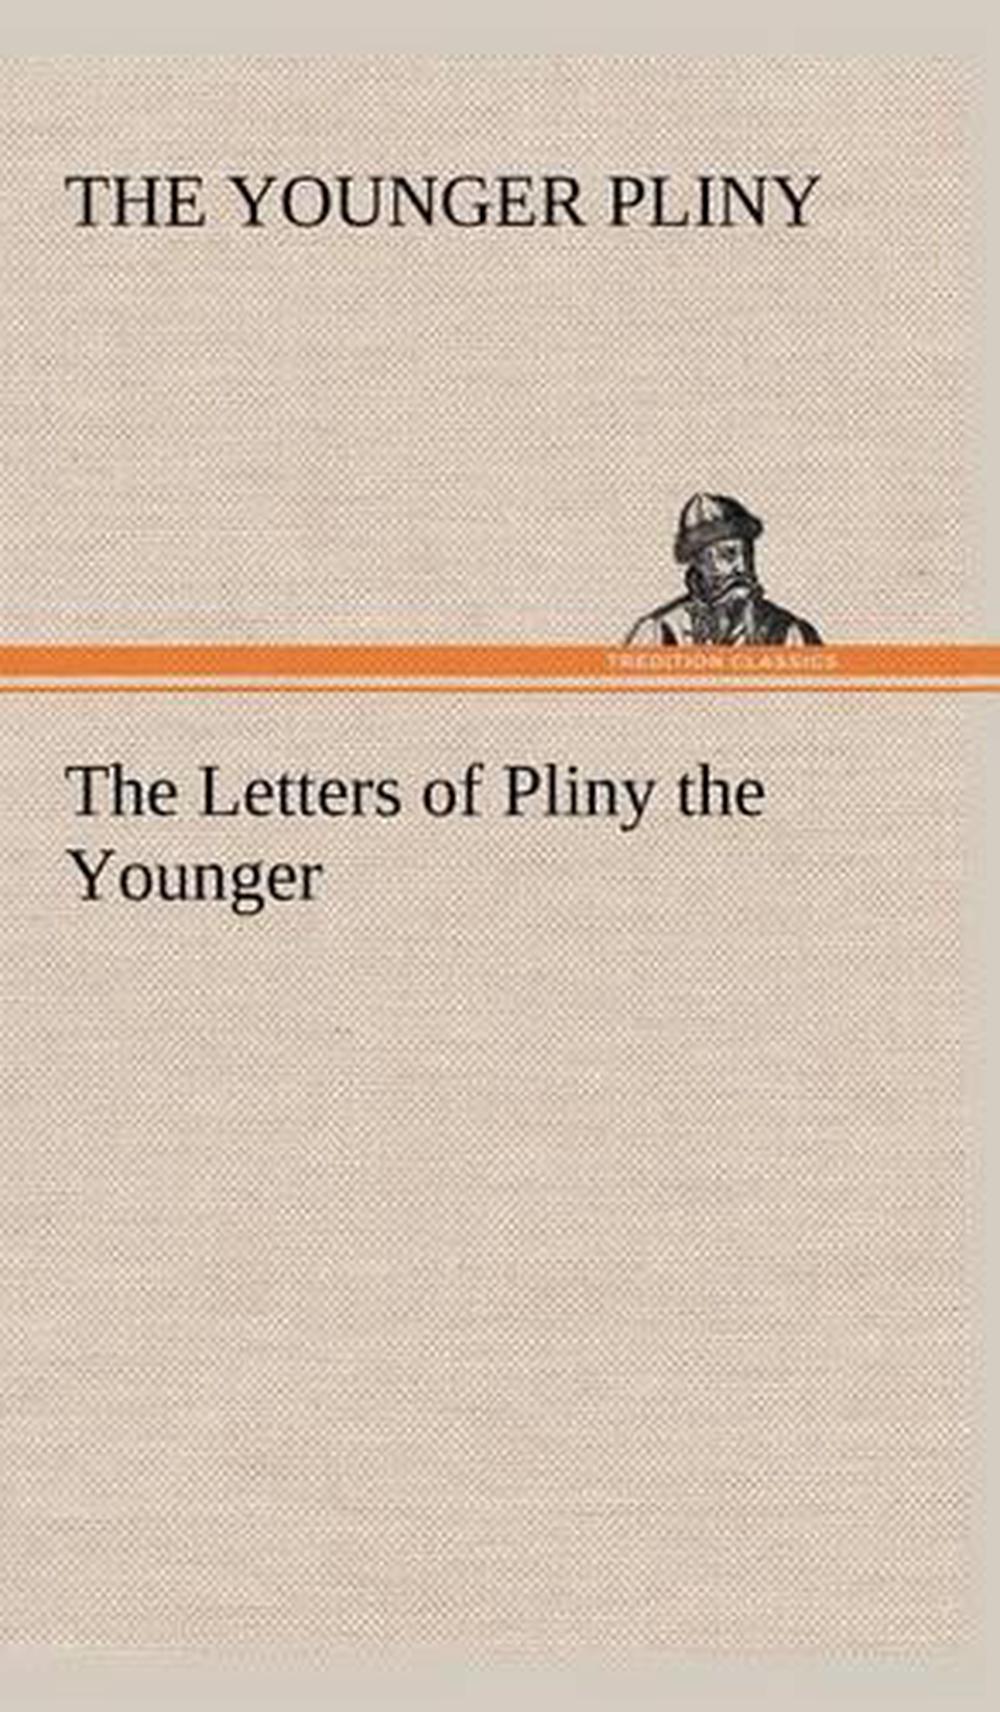 The Letters of Pliny the Younger by the Younger Pliny (English